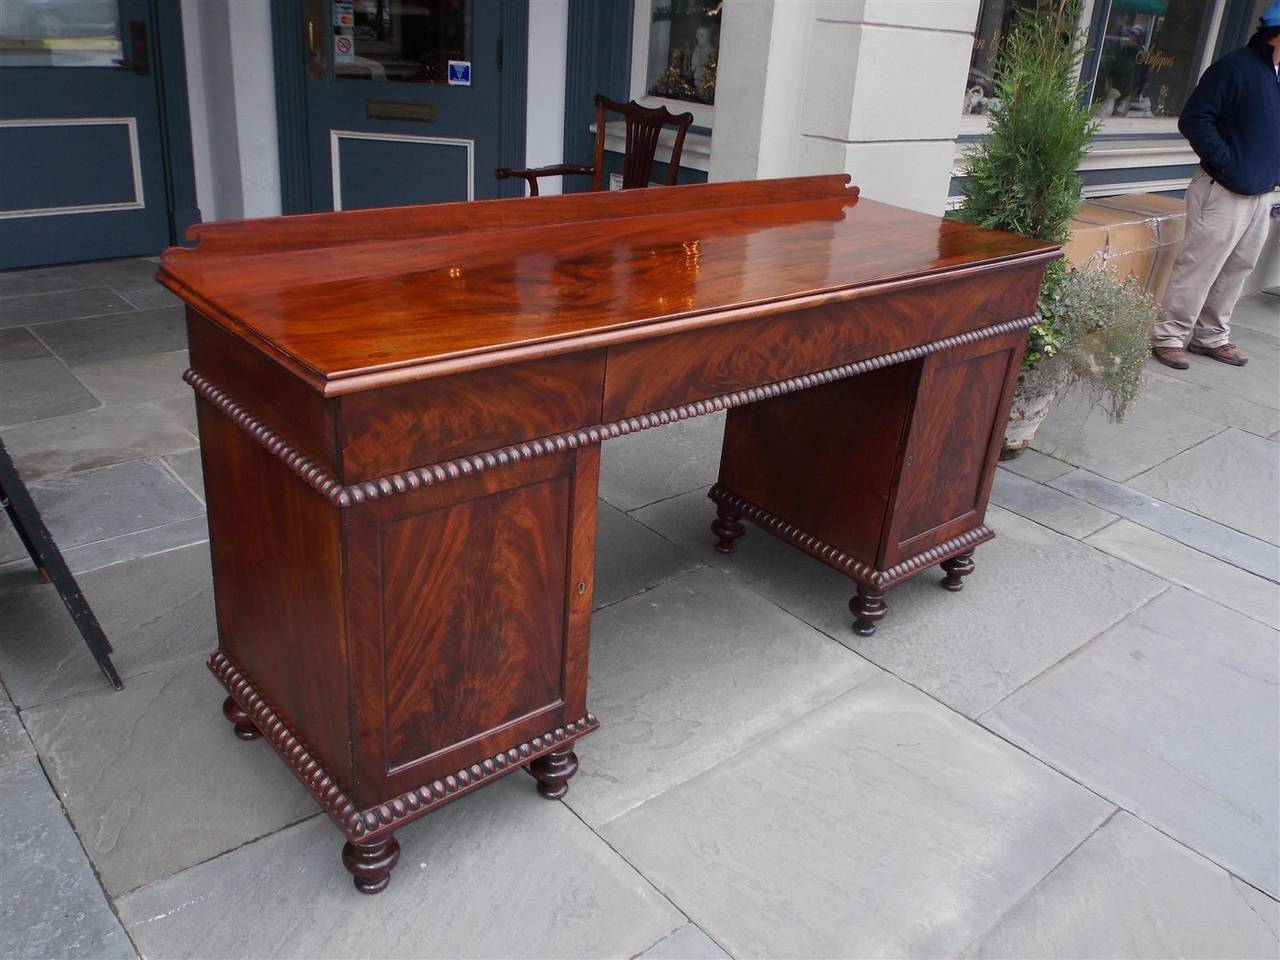 English Georgian crotch mahogany sideboard with carved scrolled back splash, three flush hidden upper drawers, lower flanking cabinets with interior shelving, gadrooned molded carved edges, and terminating on turned bulbous feet.
Early 19th century.